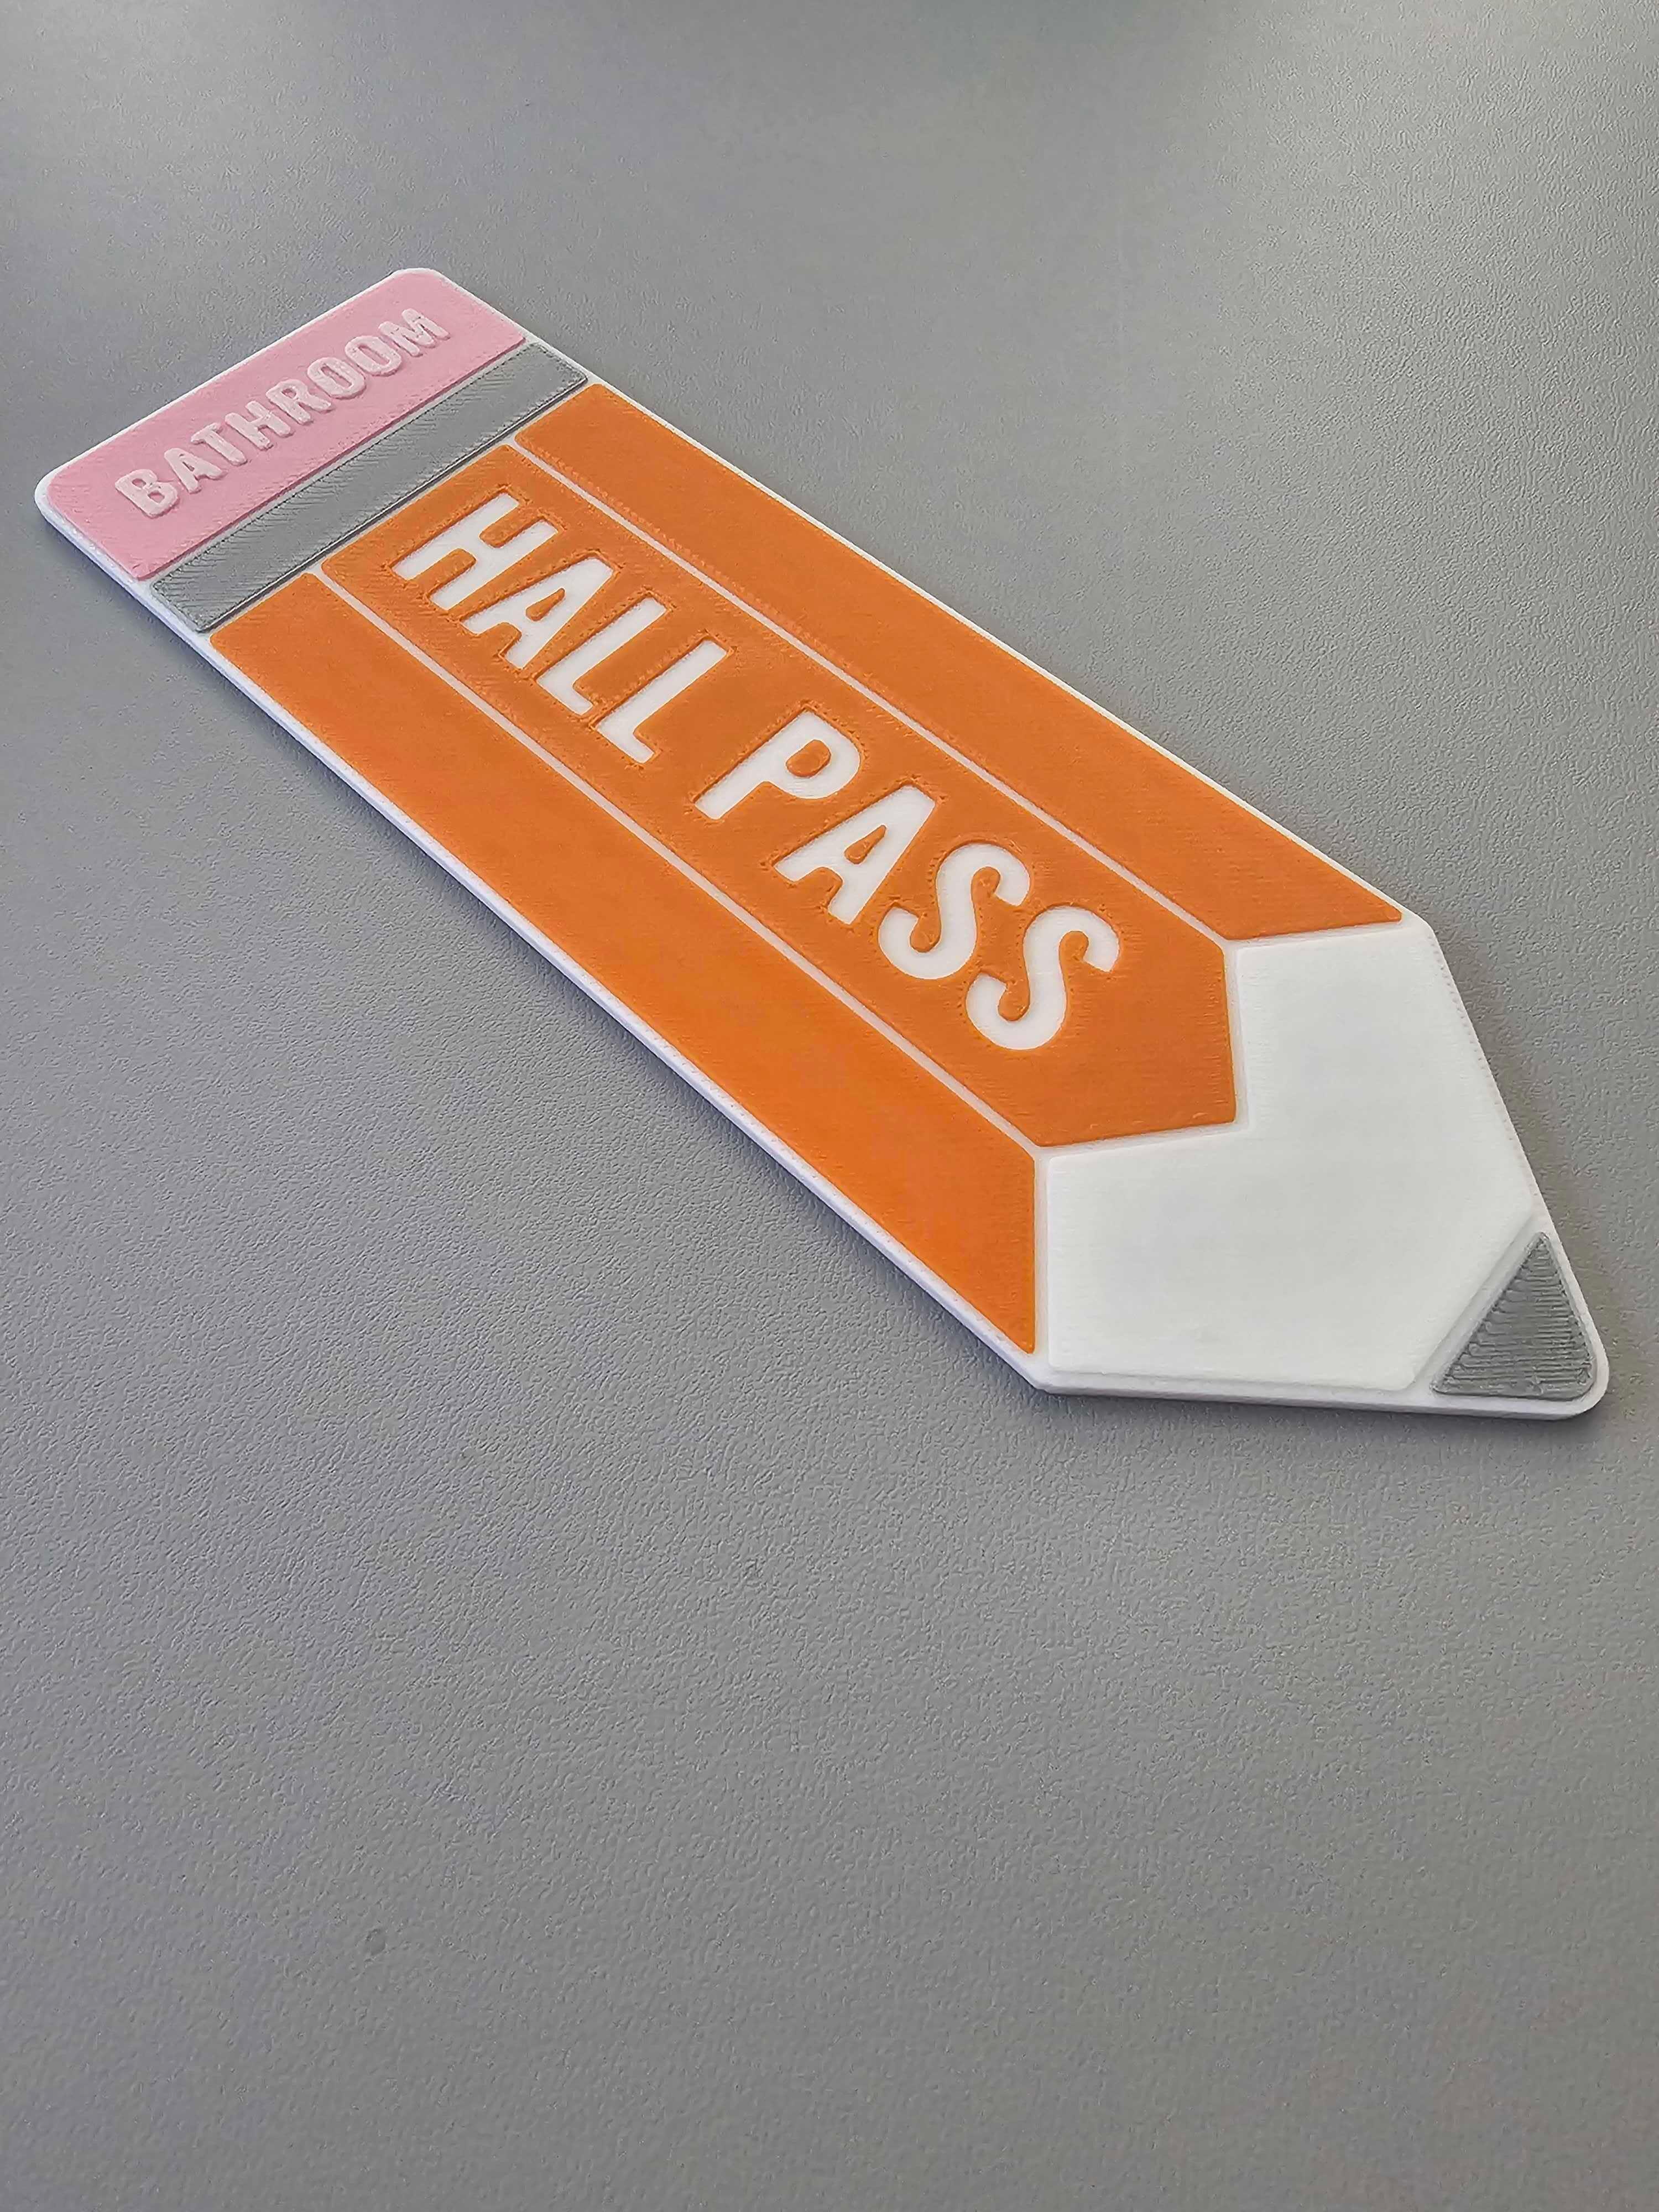 Hall Passes for BackToSchool | Multiple styles | "Pencil Holder" Display Stand for Classroom 3d model